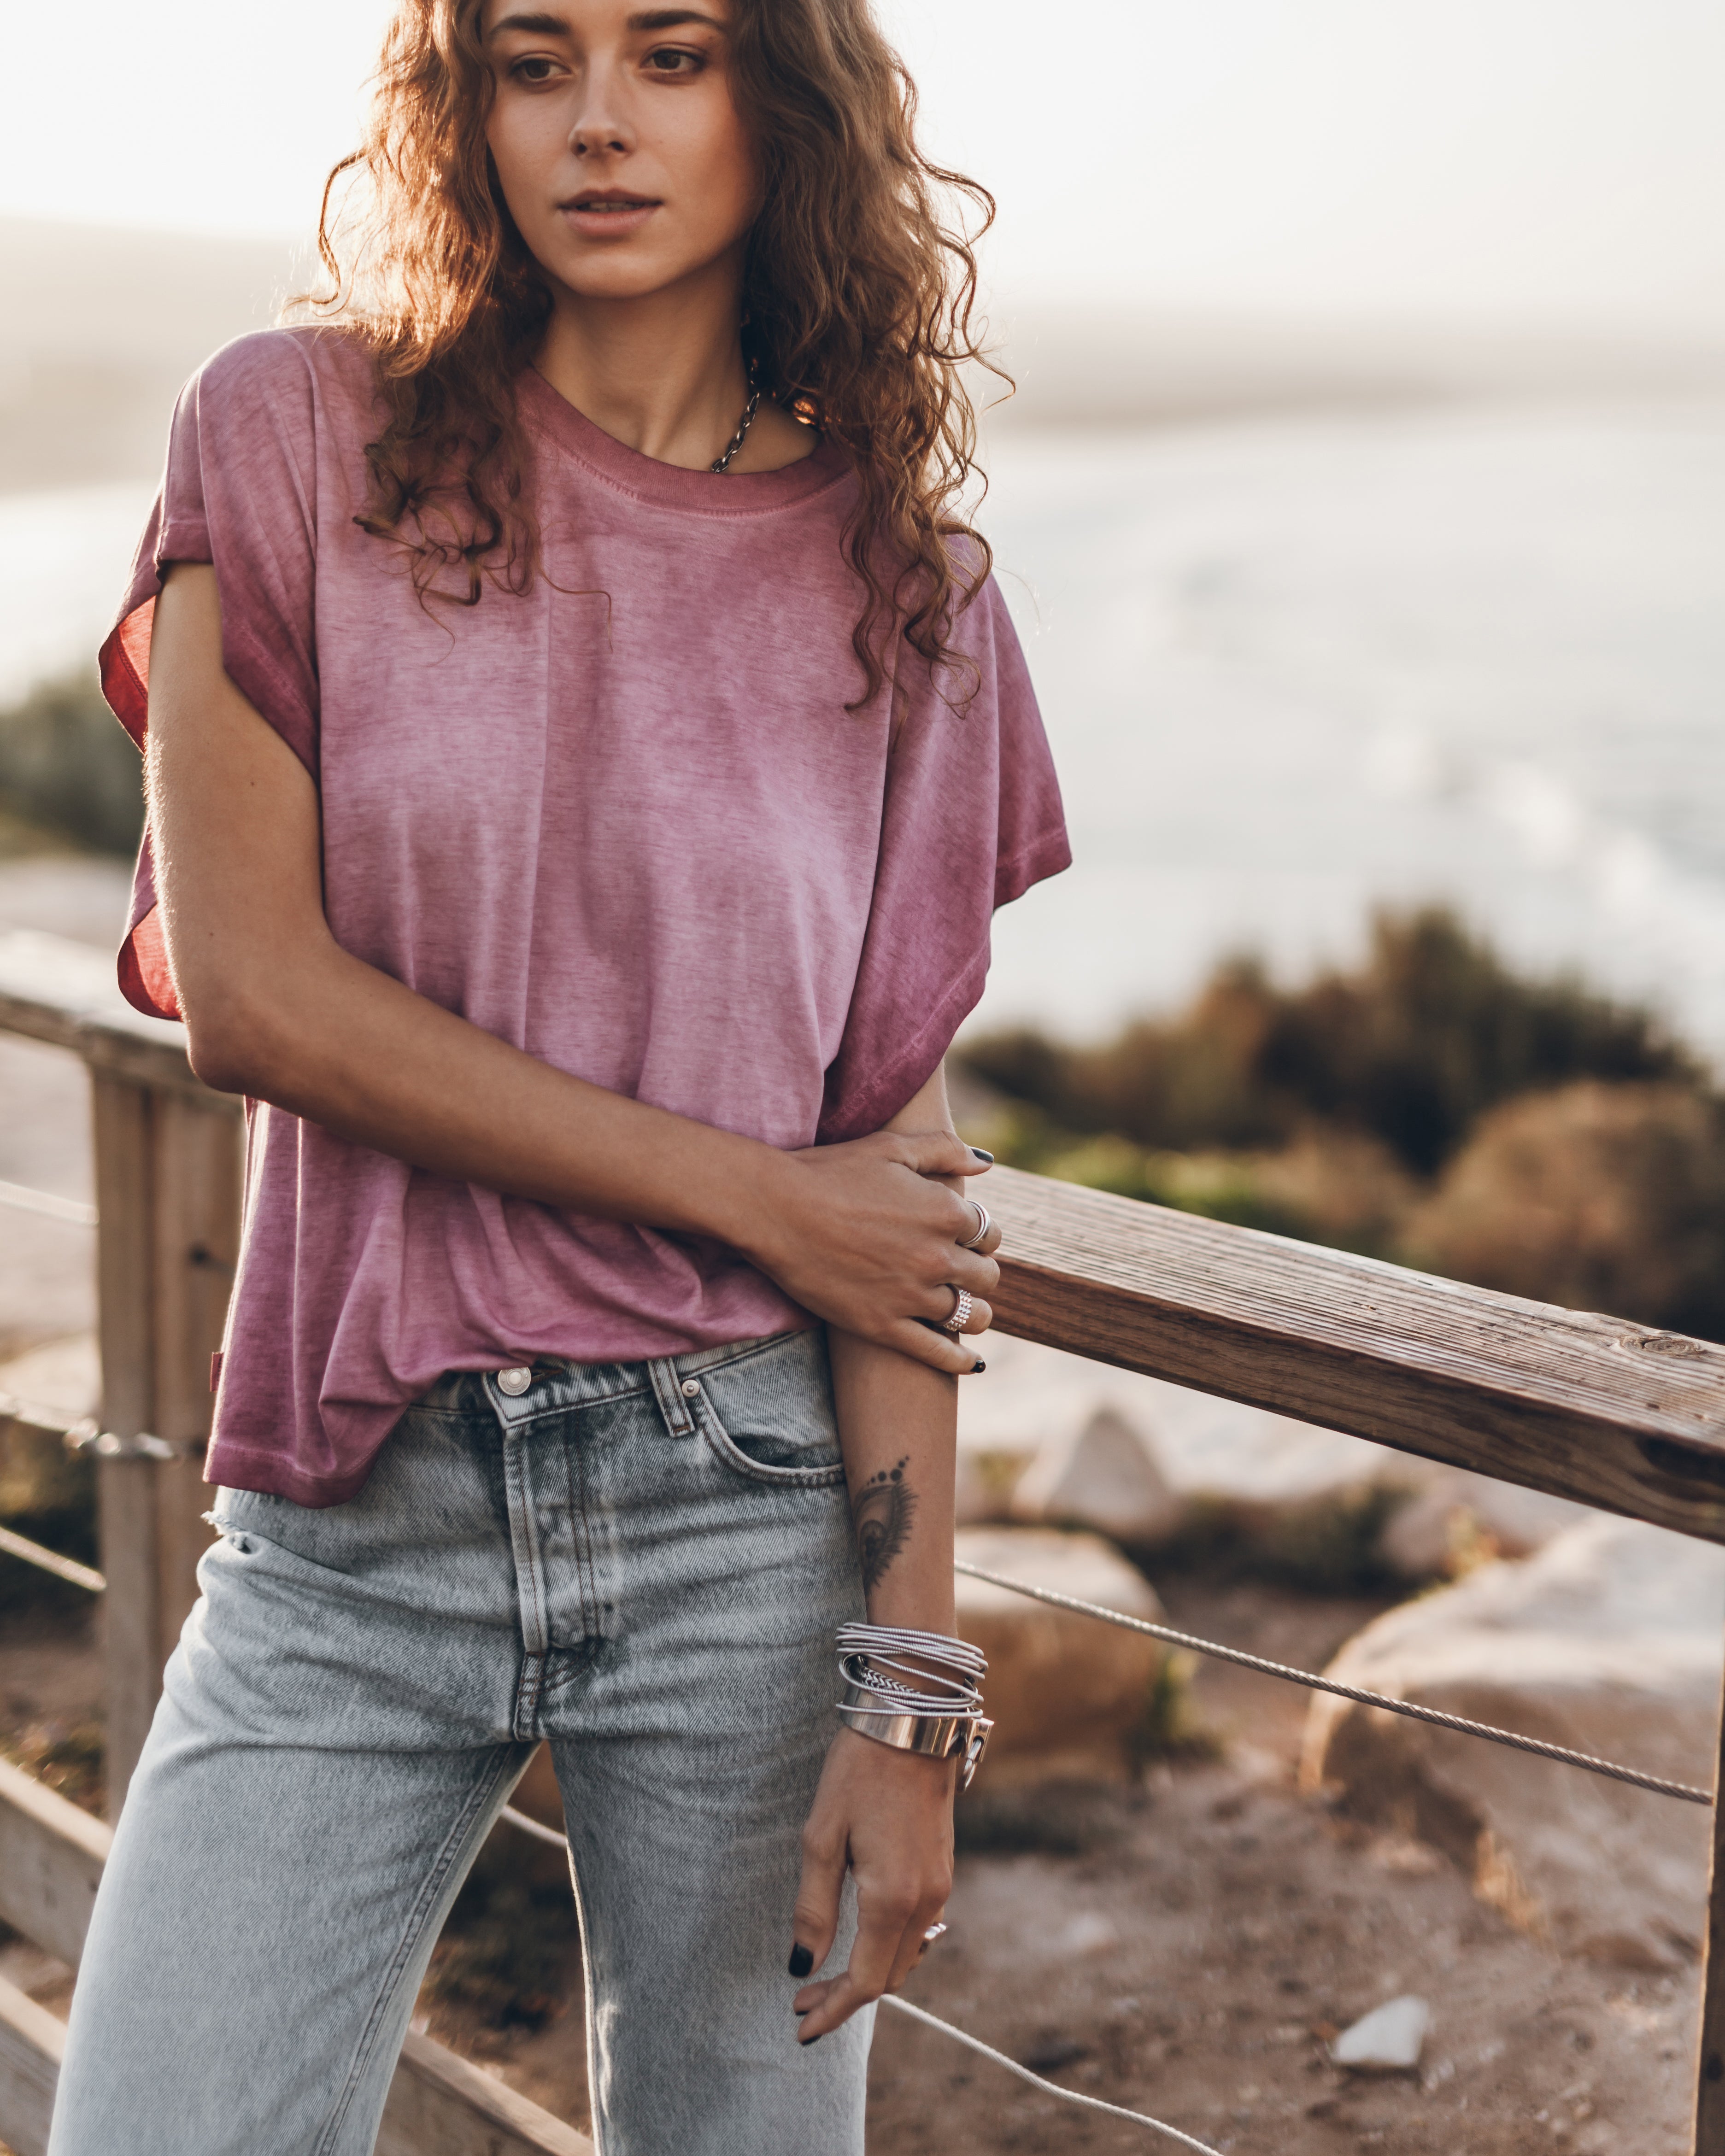 The Pink Faded Batwing T-Shirt